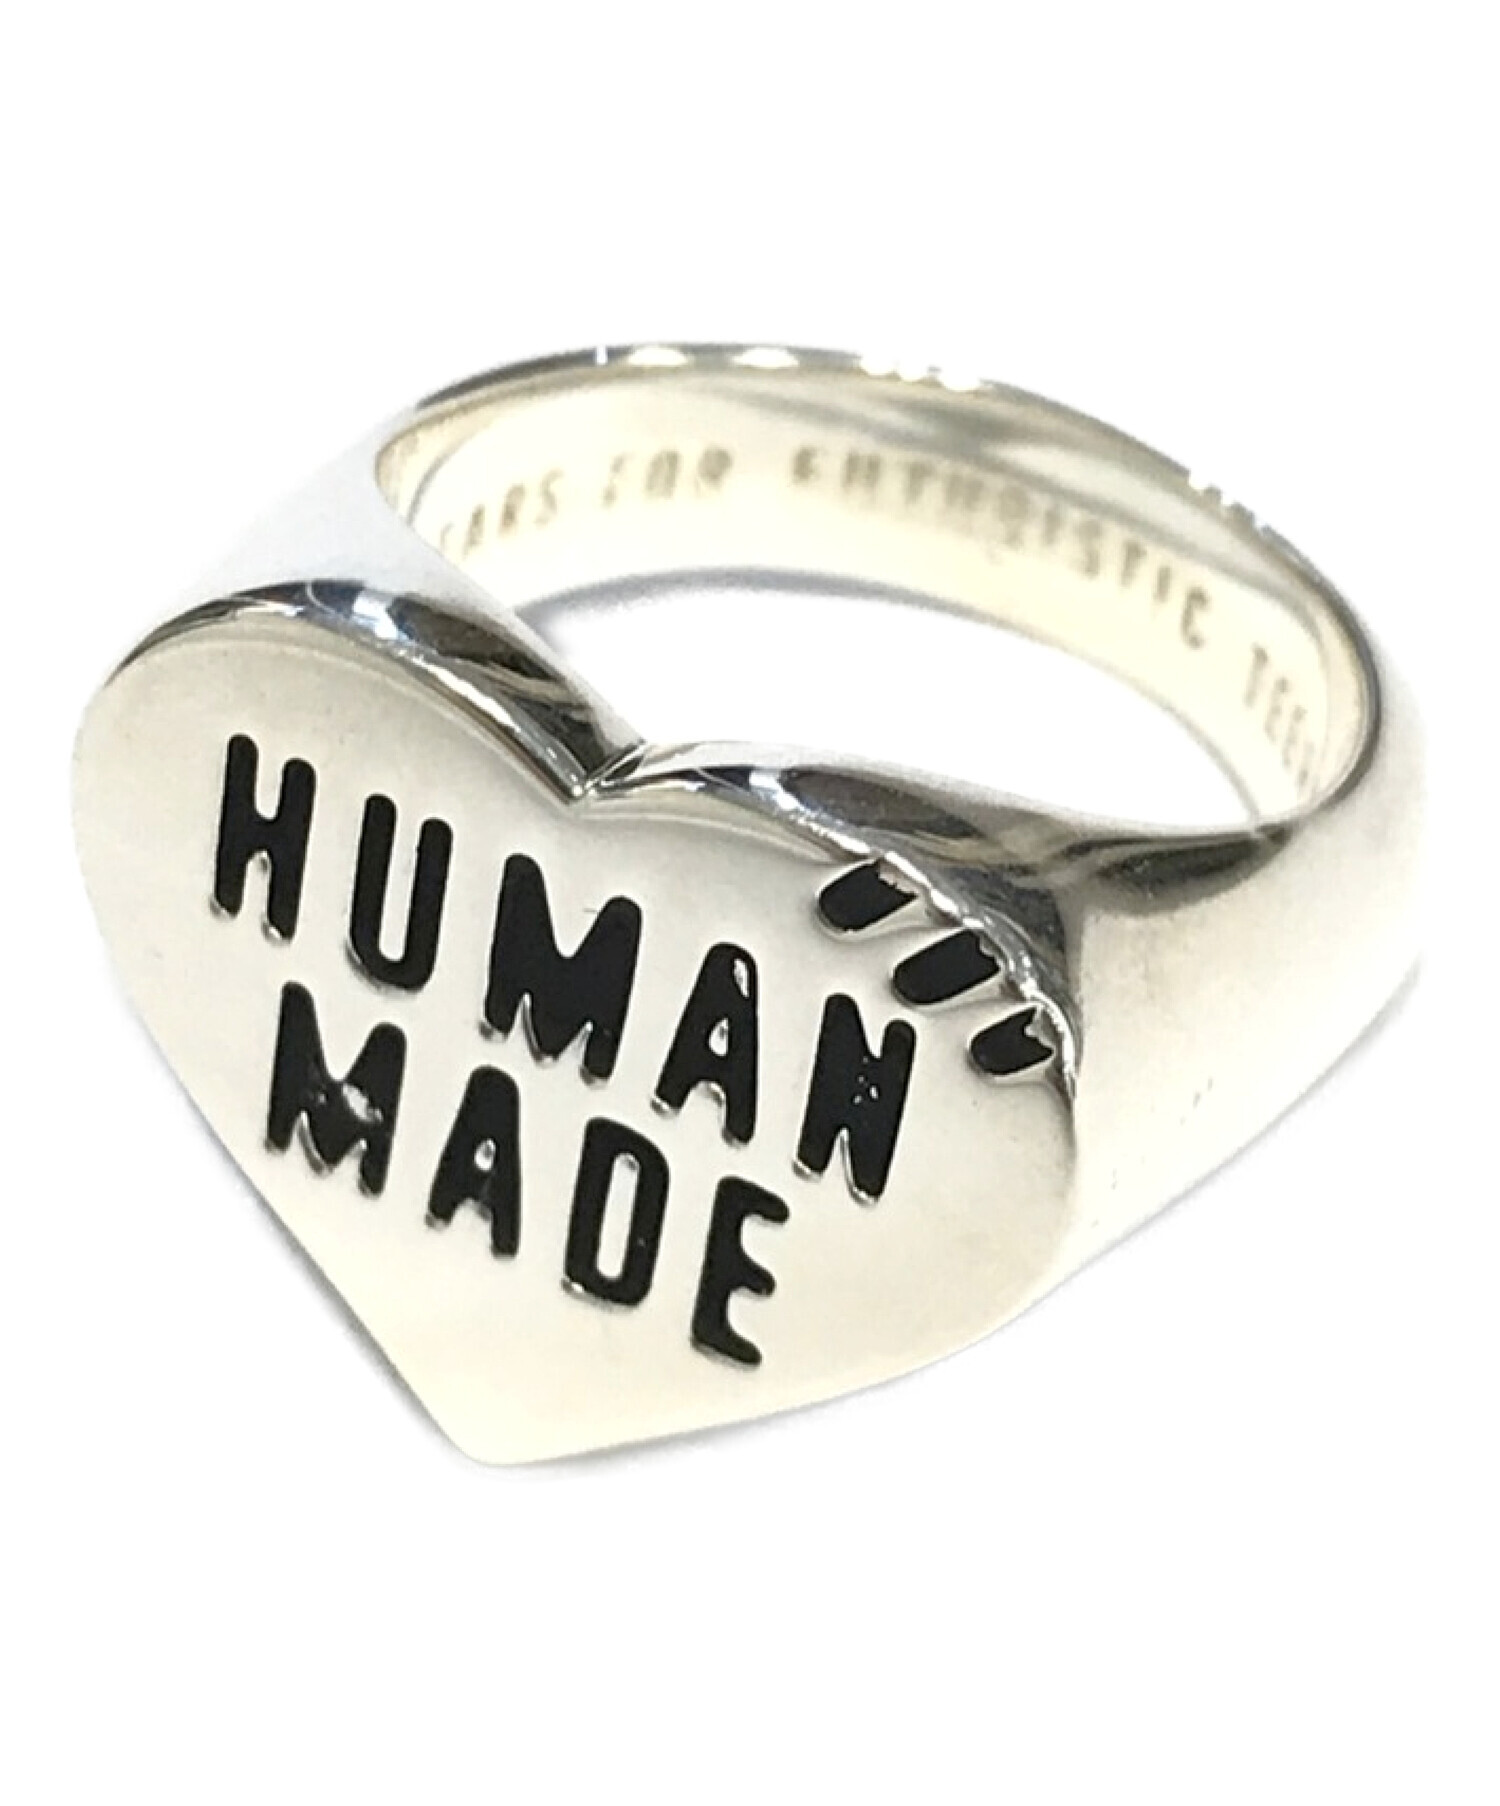 HUMAN MADE Heart Silver Ring Silver